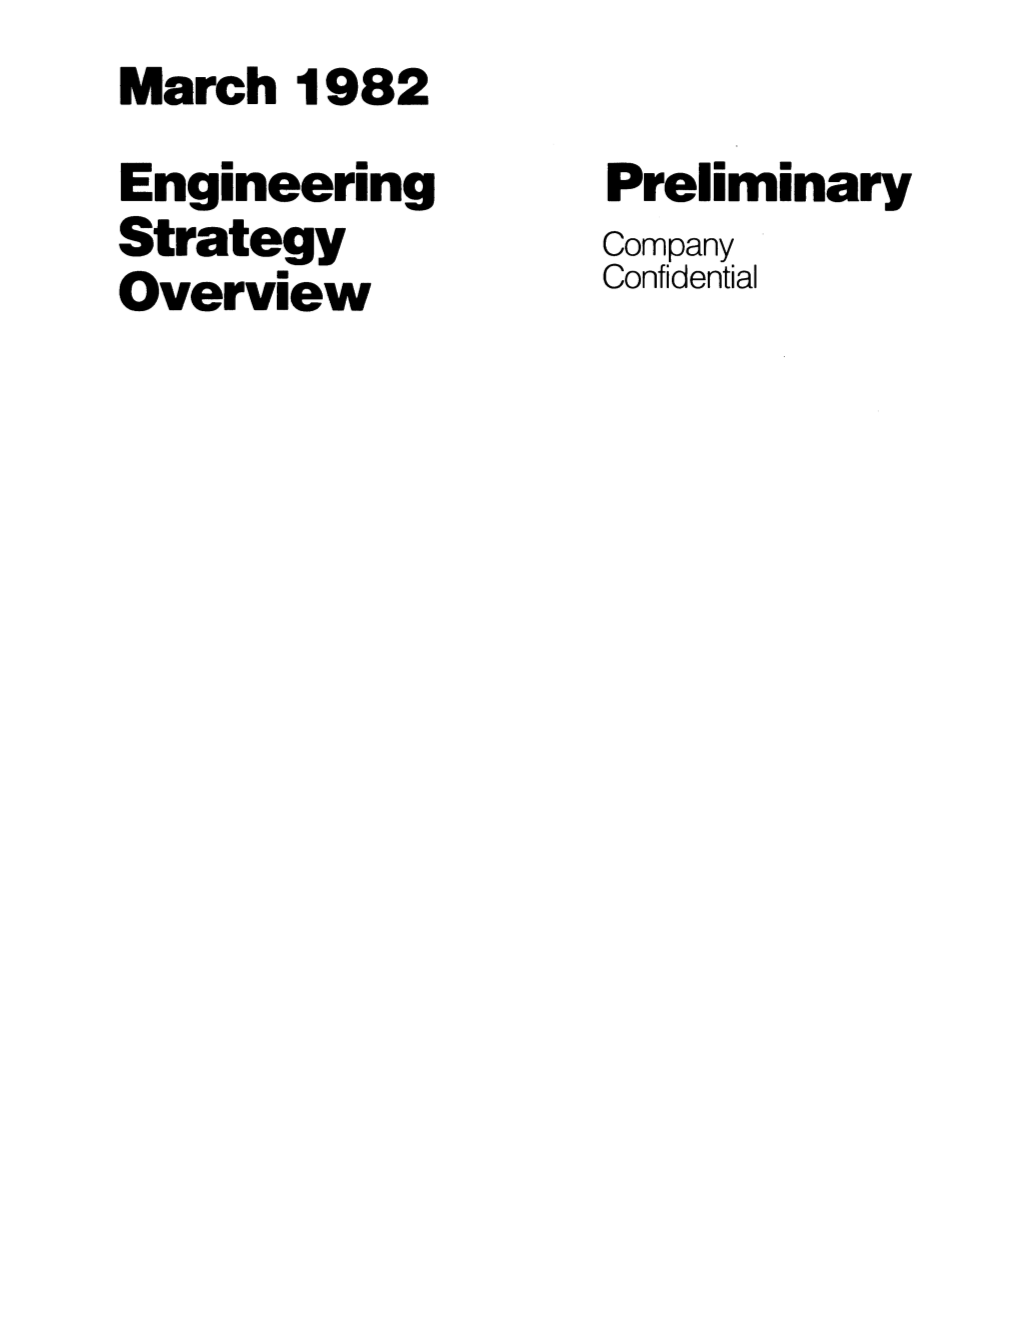 Engineering Strategy Overview Preliminary